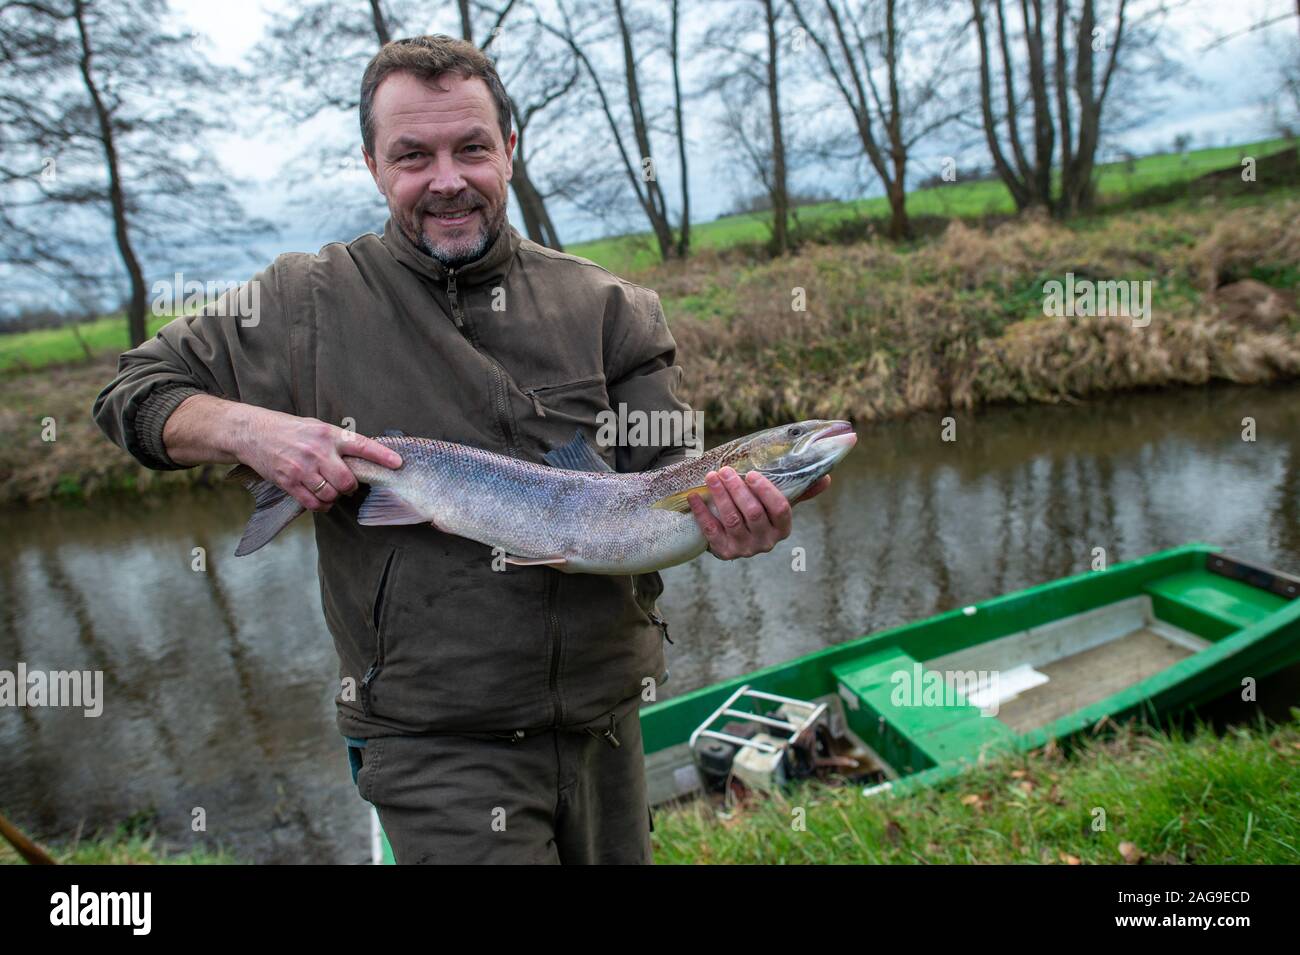 18 December 2019, Saxony-Anhalt, Nutha: Steffen Zahn, project manager of the Migratory Fish Programme Saxony-Anhalt of the Institute for Inland Fisheries in Potsdam, holds a 4 kilo female salmon in his hands on the Nuthe. The fish had been caught during the trial fishing on the Nuthe. There the animal was released 3 to 4 years ago what the fishermen noticed at a mark on the pelvic fin. In the meantime, the salmon had swum as far as the Atlantic and has now returned to the Nuthe for spawning. In the Nuthe a total of 143500 young salmon and 90300 sea trout hatchlings have been released so far. P Stock Photo